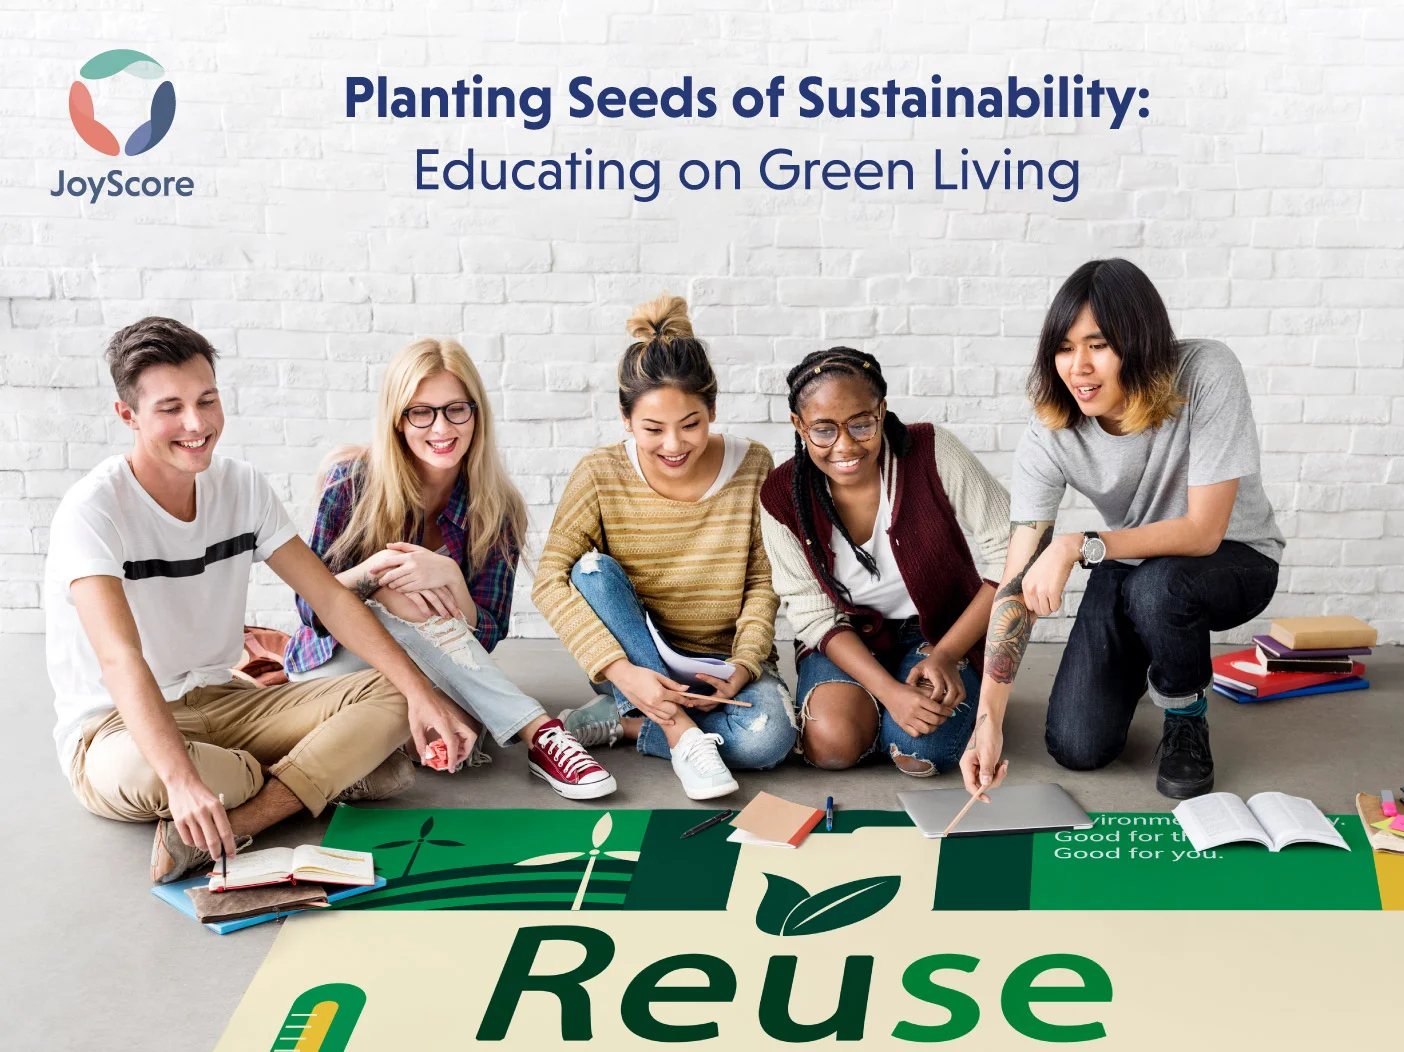 Planting Seeds of Sustainability - Educating on Green Living